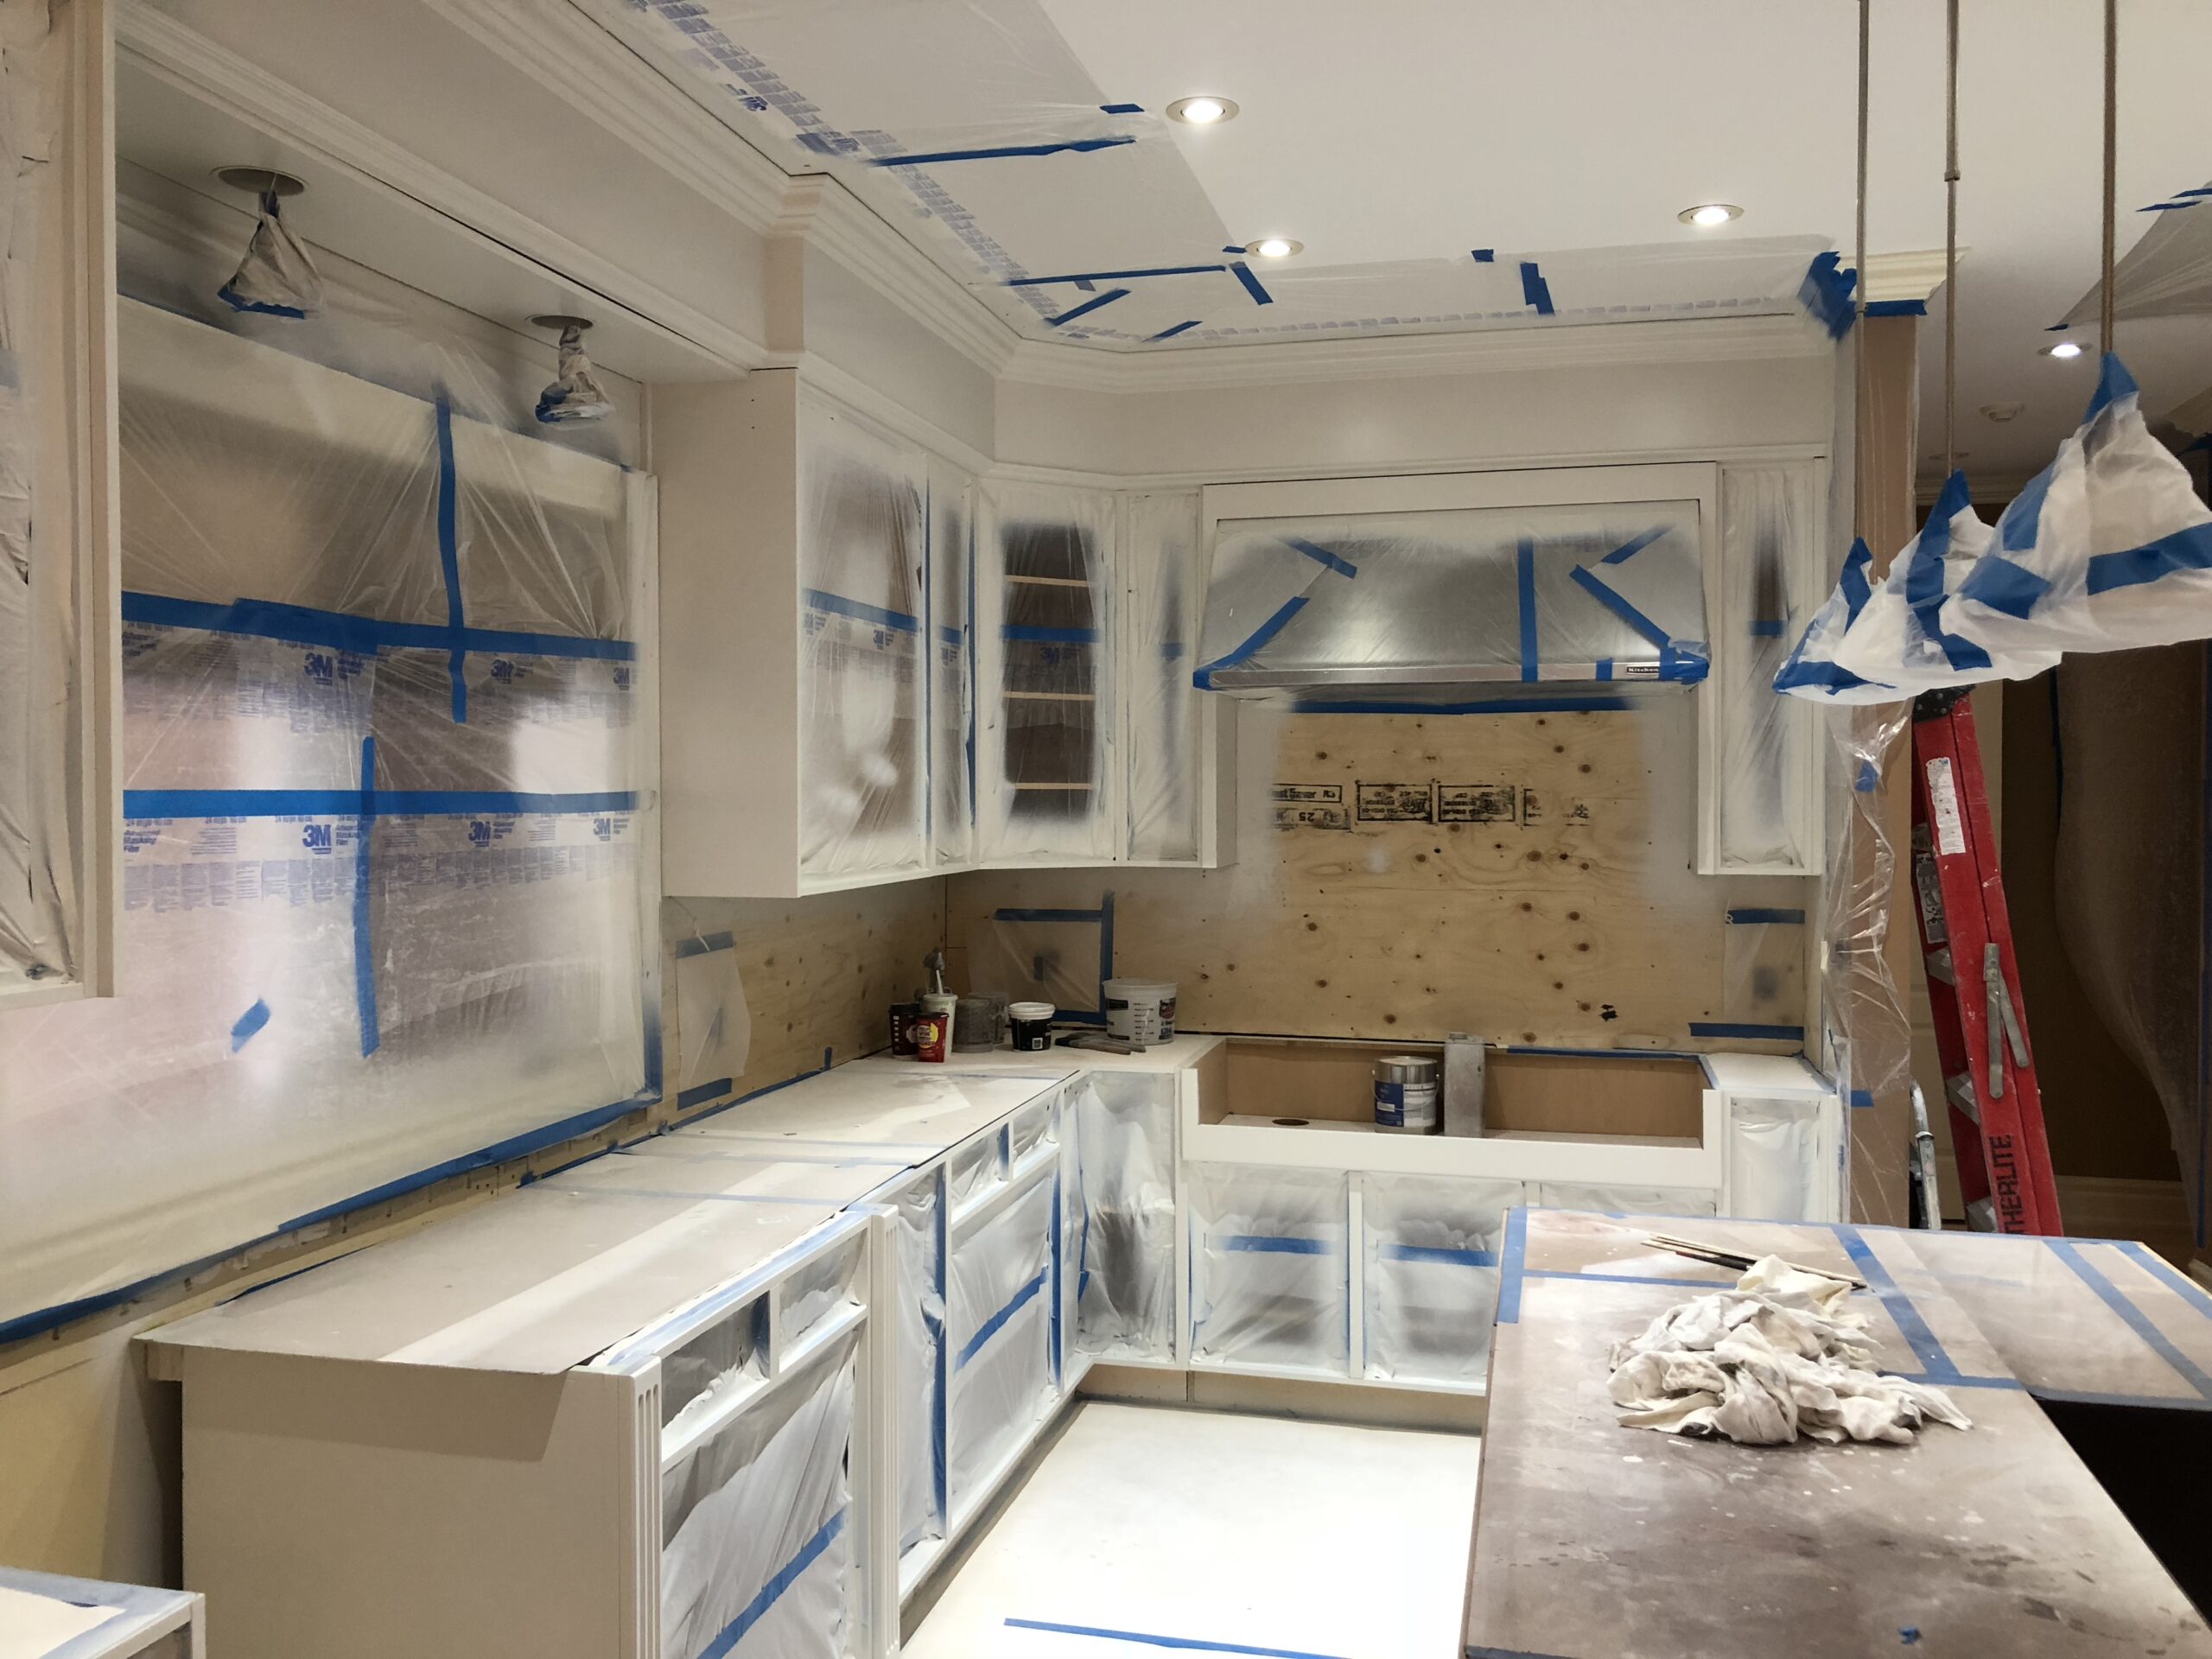 How to Paint Kitchen Cabinet Doors – The Complete Step by Step Process